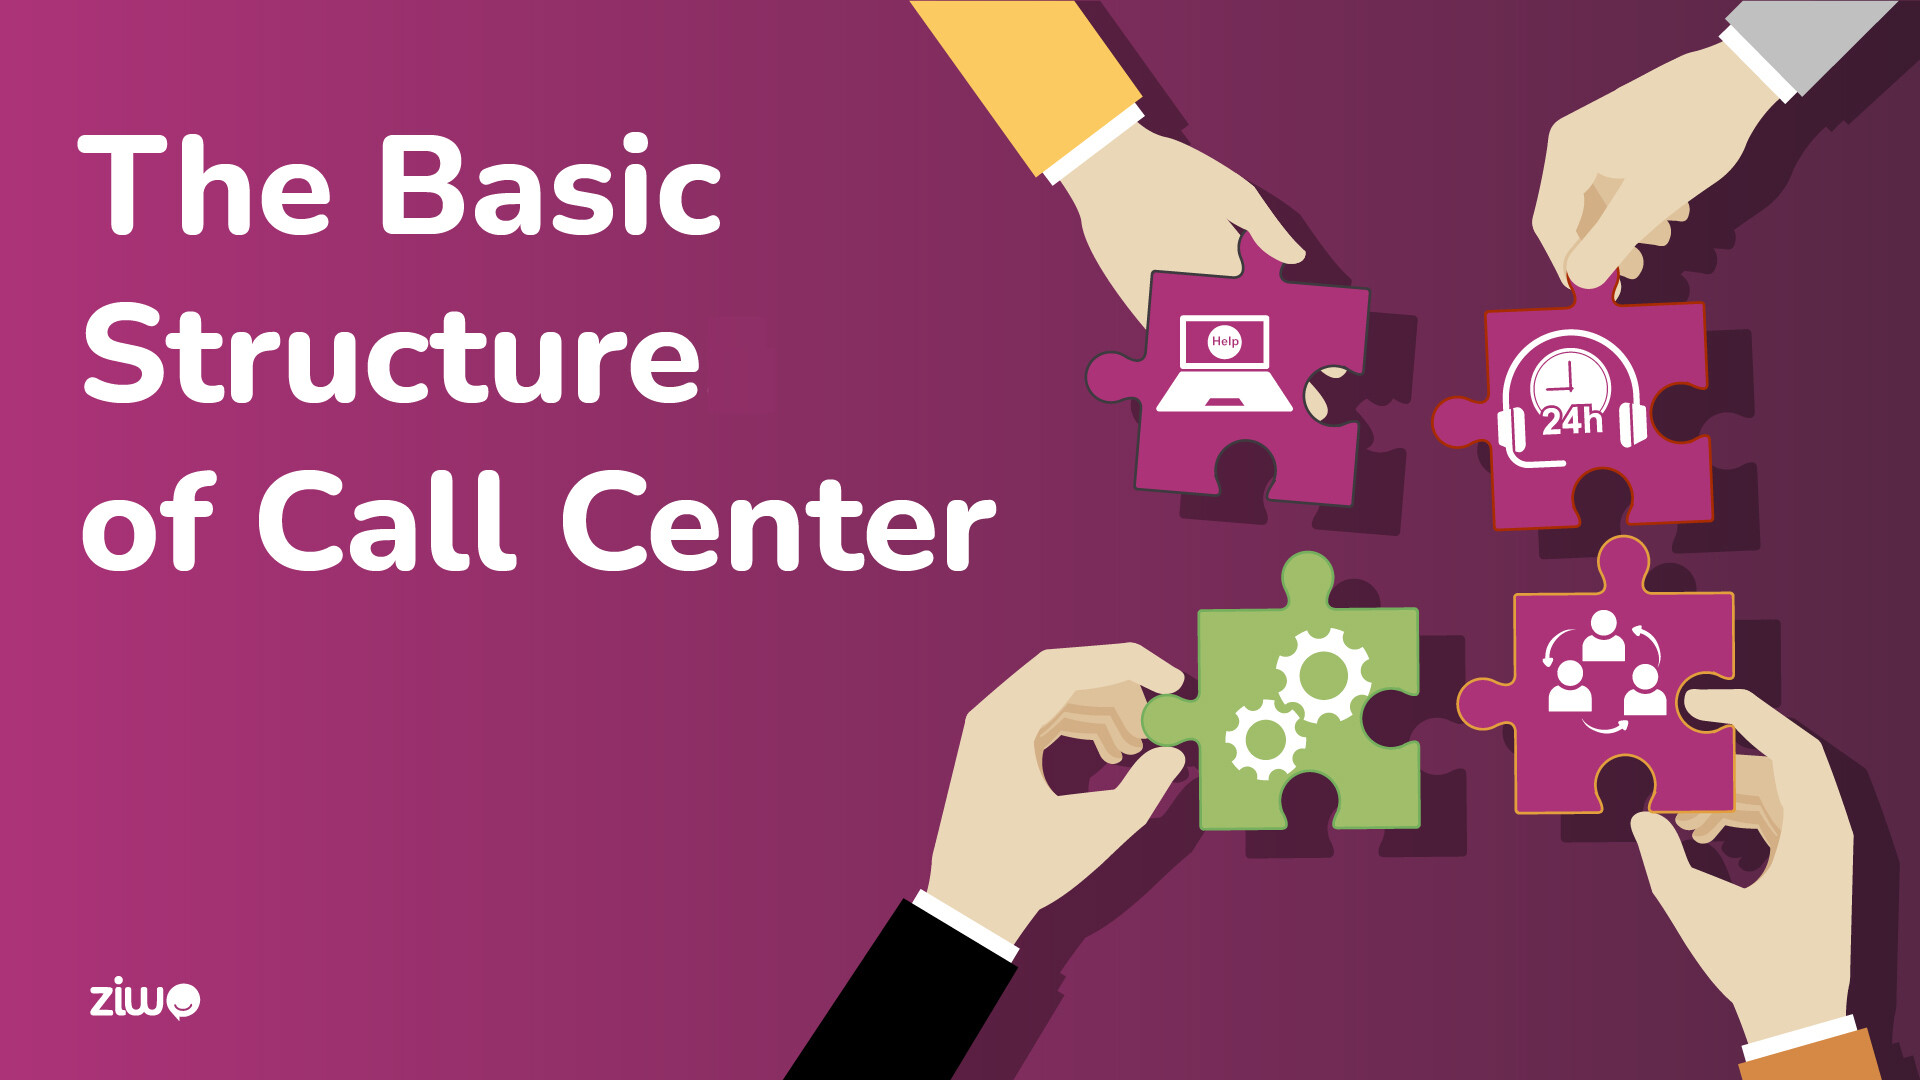 The basic structure of call center